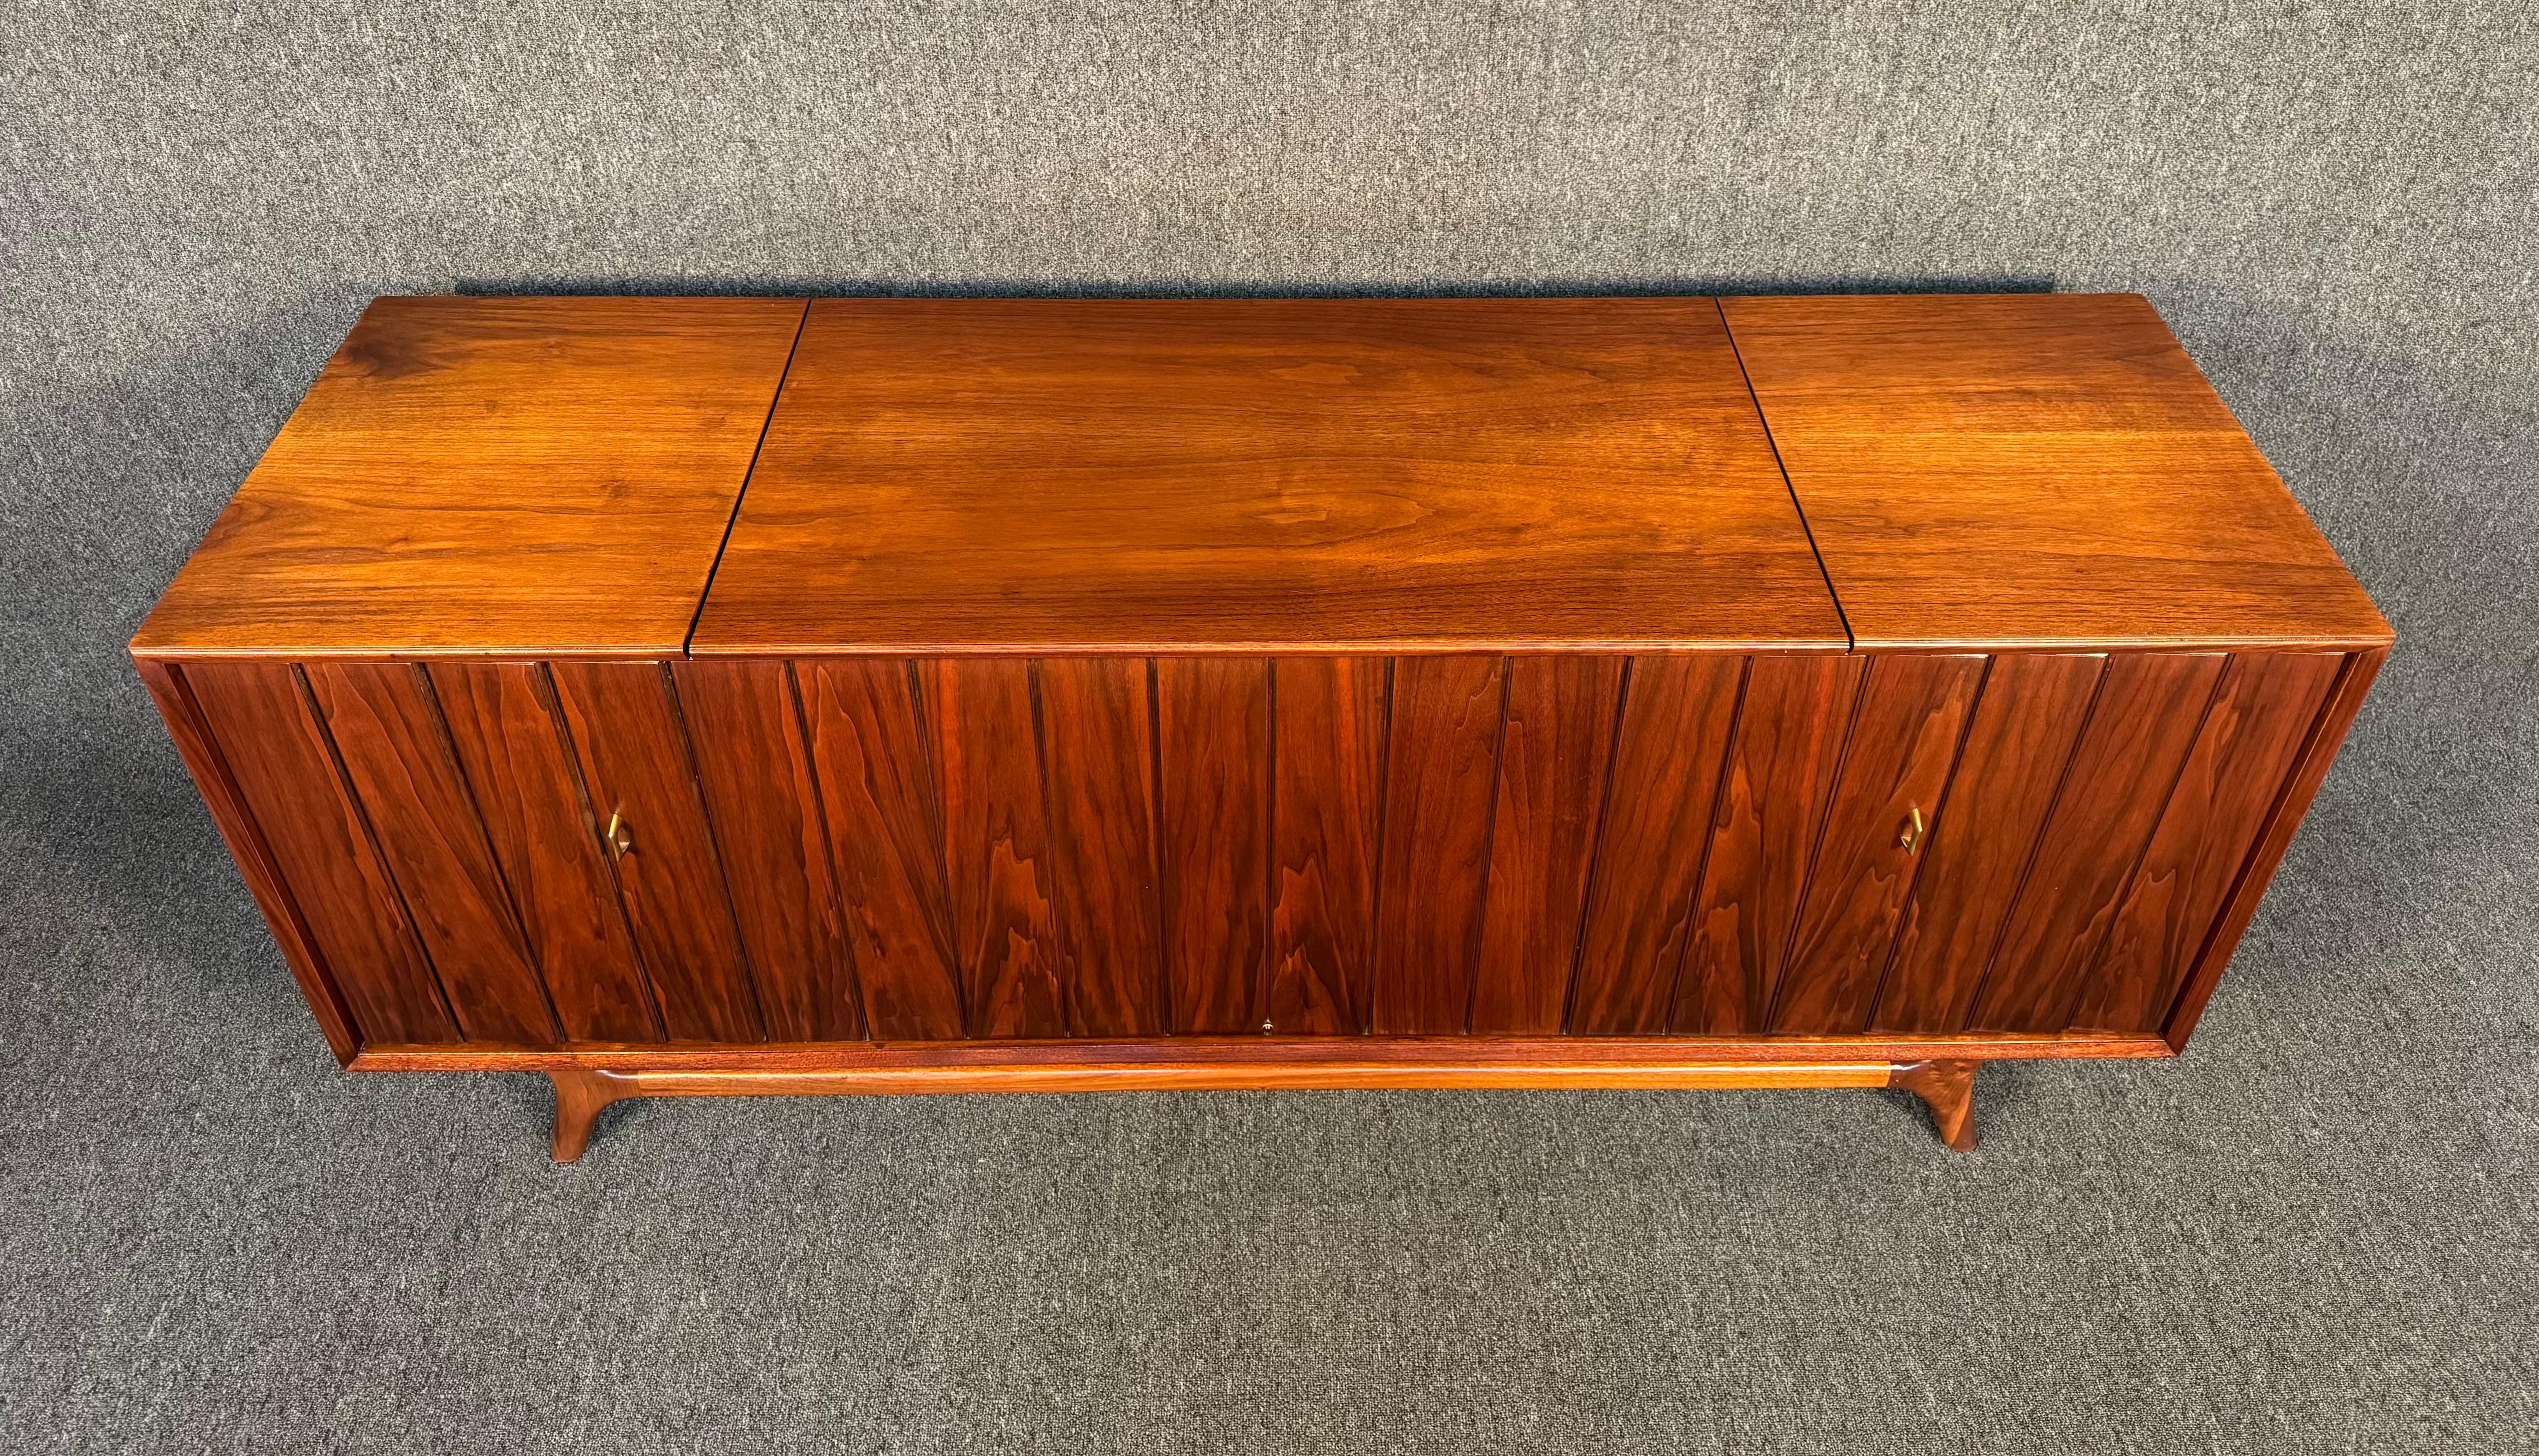 Vintage Mid Century Modern Walnut Zenith Stereo Console In Good Condition For Sale In San Marcos, CA